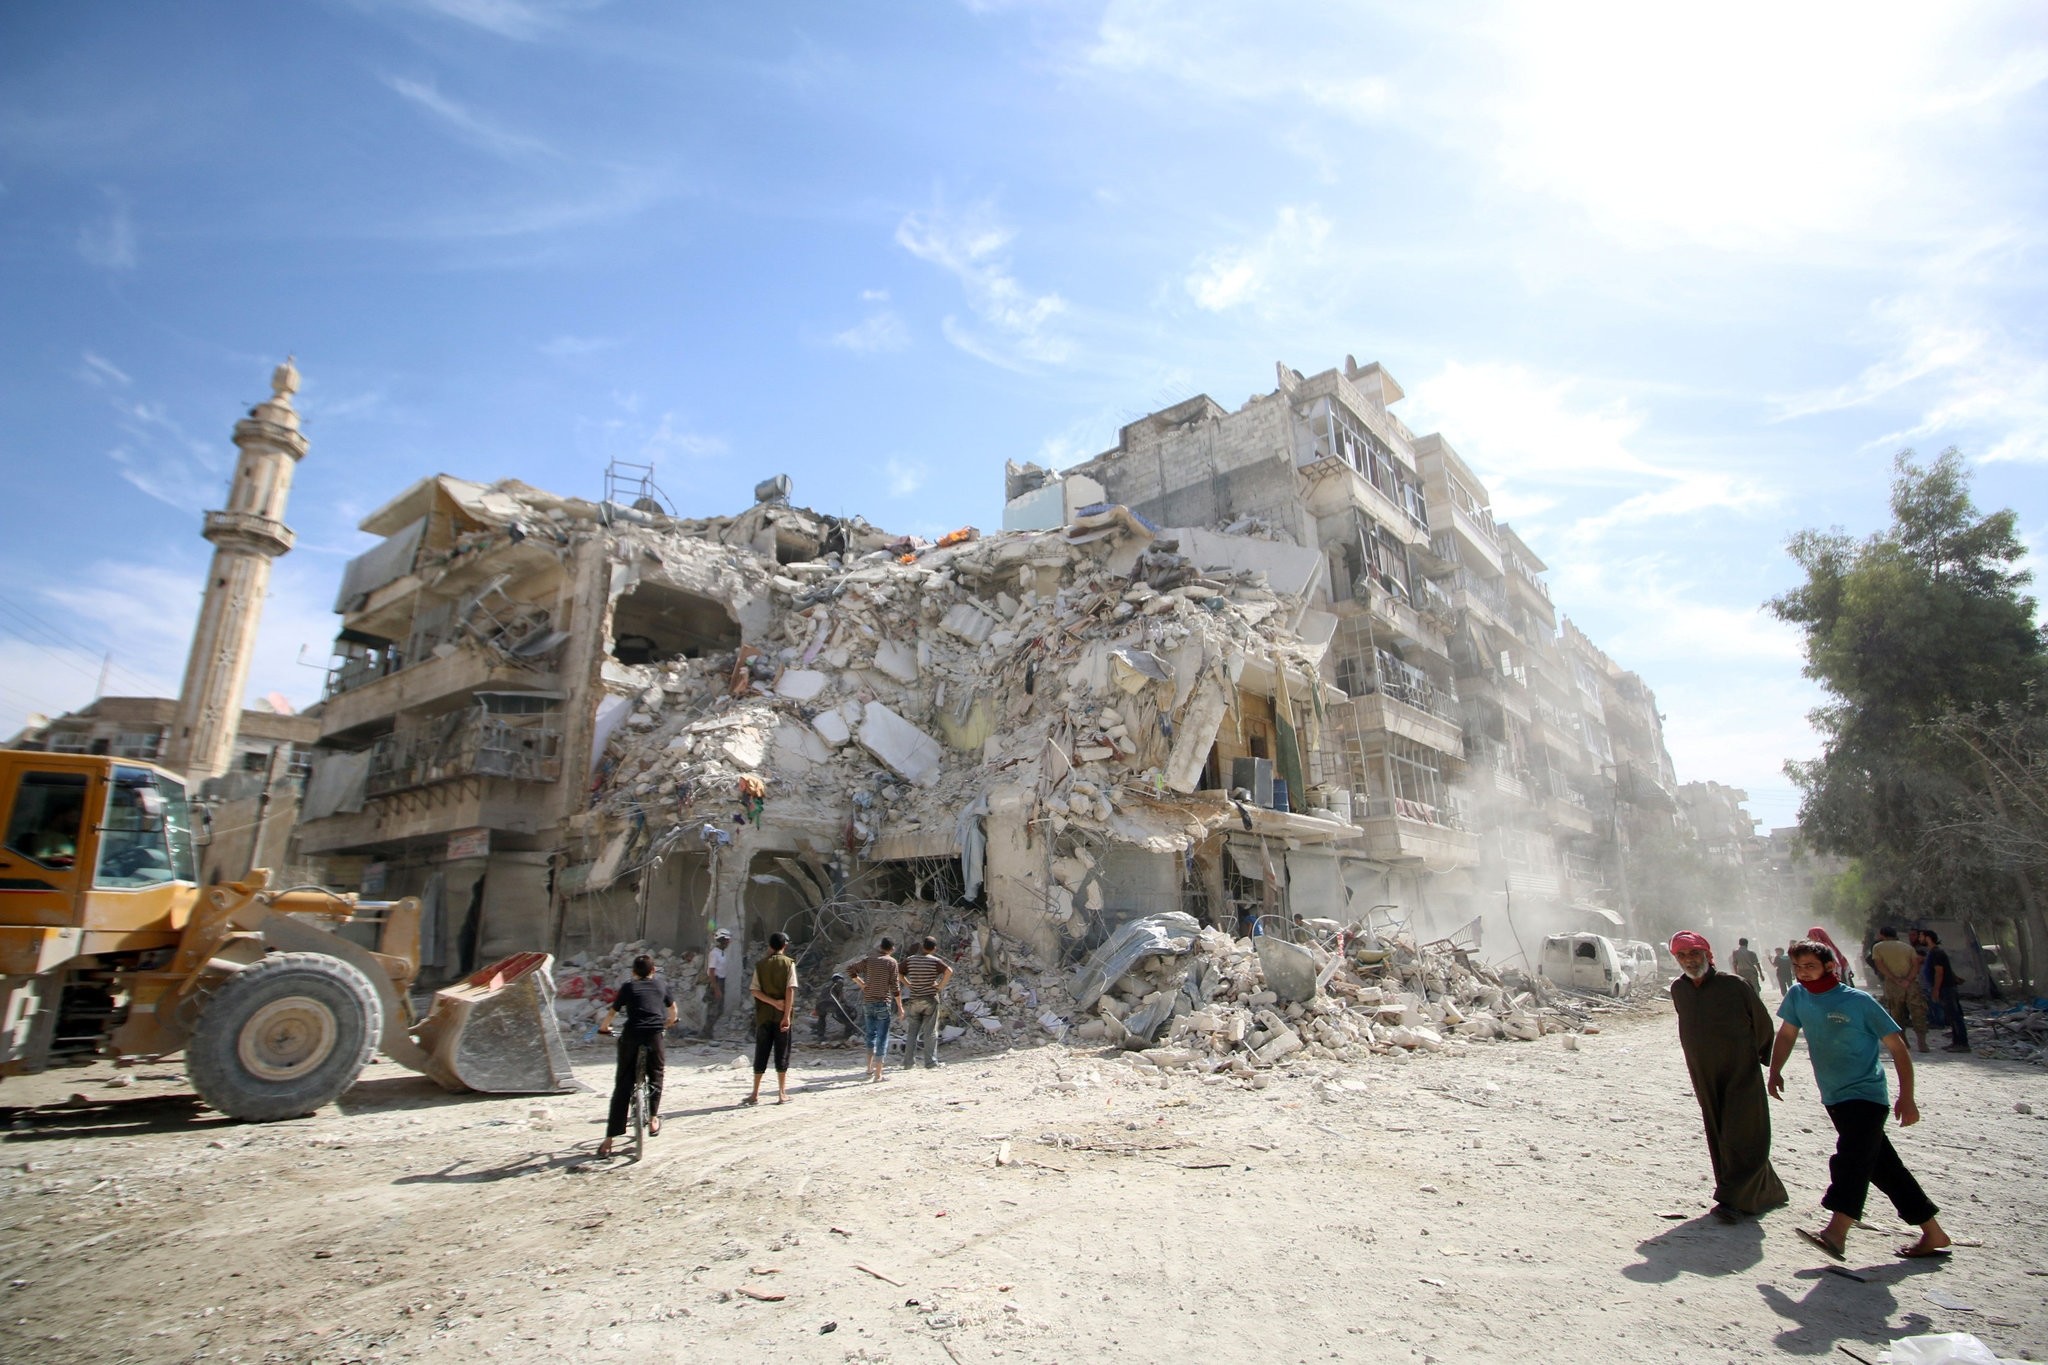 People inspect a damaged site after an air strike Sunday in the rebel-held besieged al-Qaterji neighbourhood of Aleppo, Syria October 17, 2016. (REUTERS Photo)